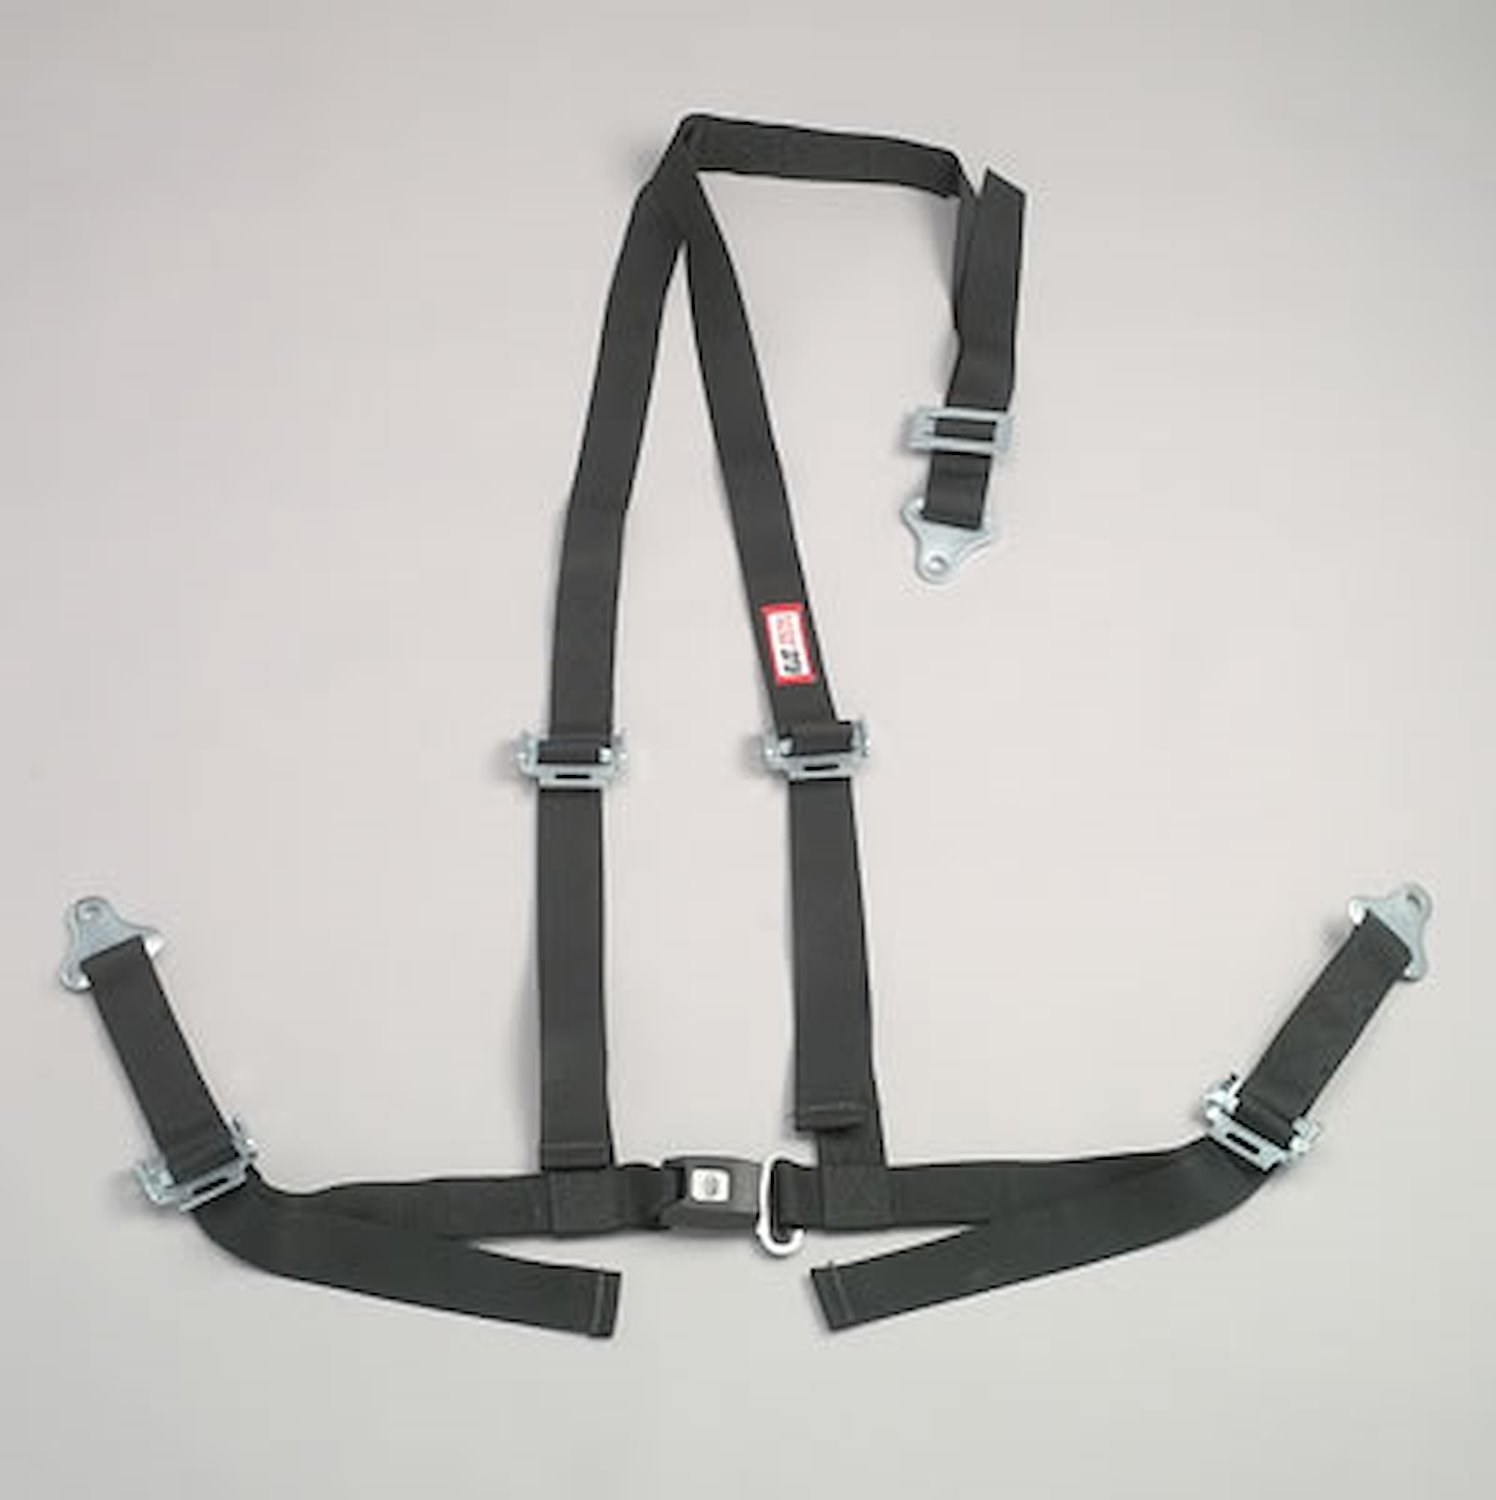 NON-SFI B&T HARNESS 2 PULL UP Lap Belt 2 S. H. V ROLL BAR Mount ALL SNAP ENDS KHAKI